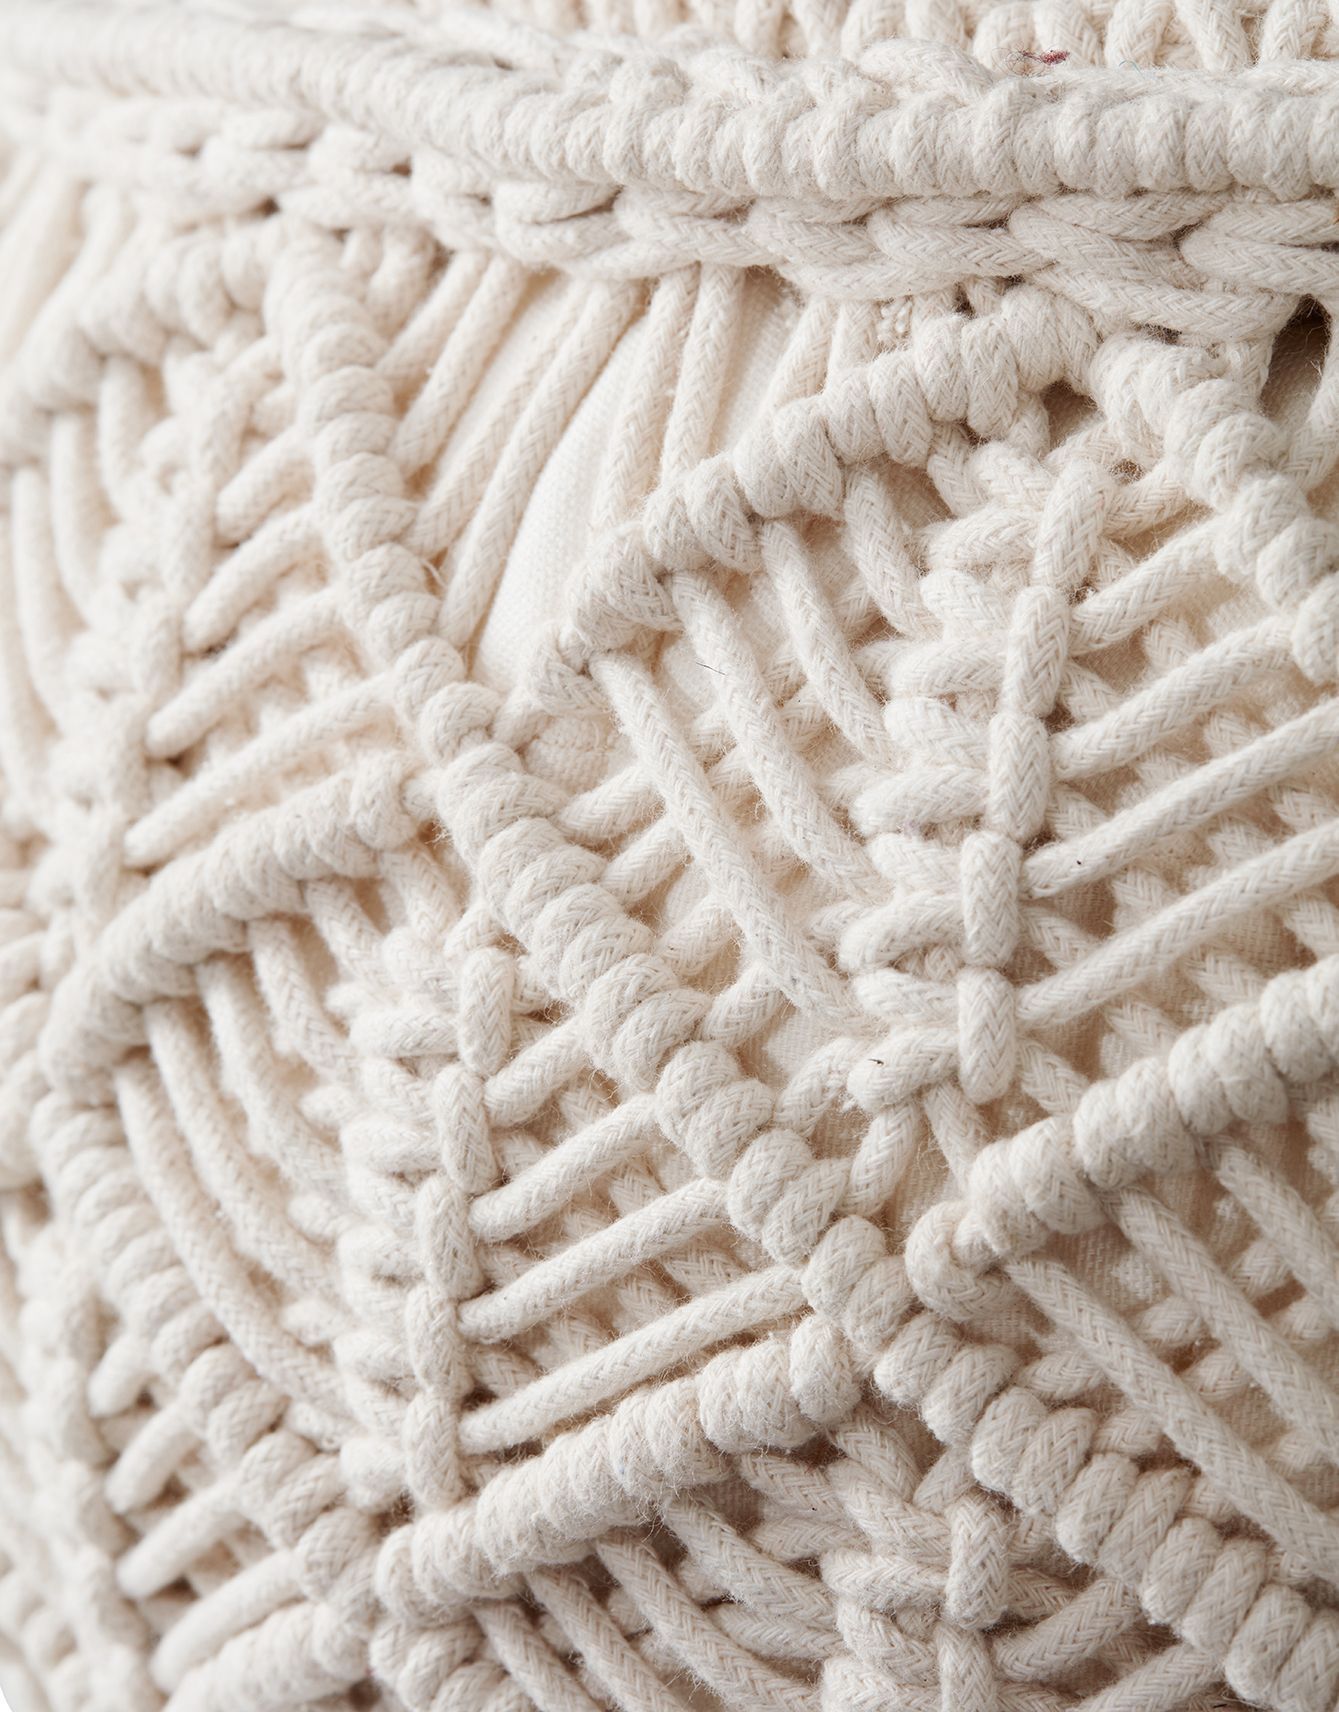 Macrame Pouf Sittpuff | Sittpuff, Pouf, Idéer With Regard To Charcoal And Camel Basket Weave Pouf Ottomans (View 8 of 20)